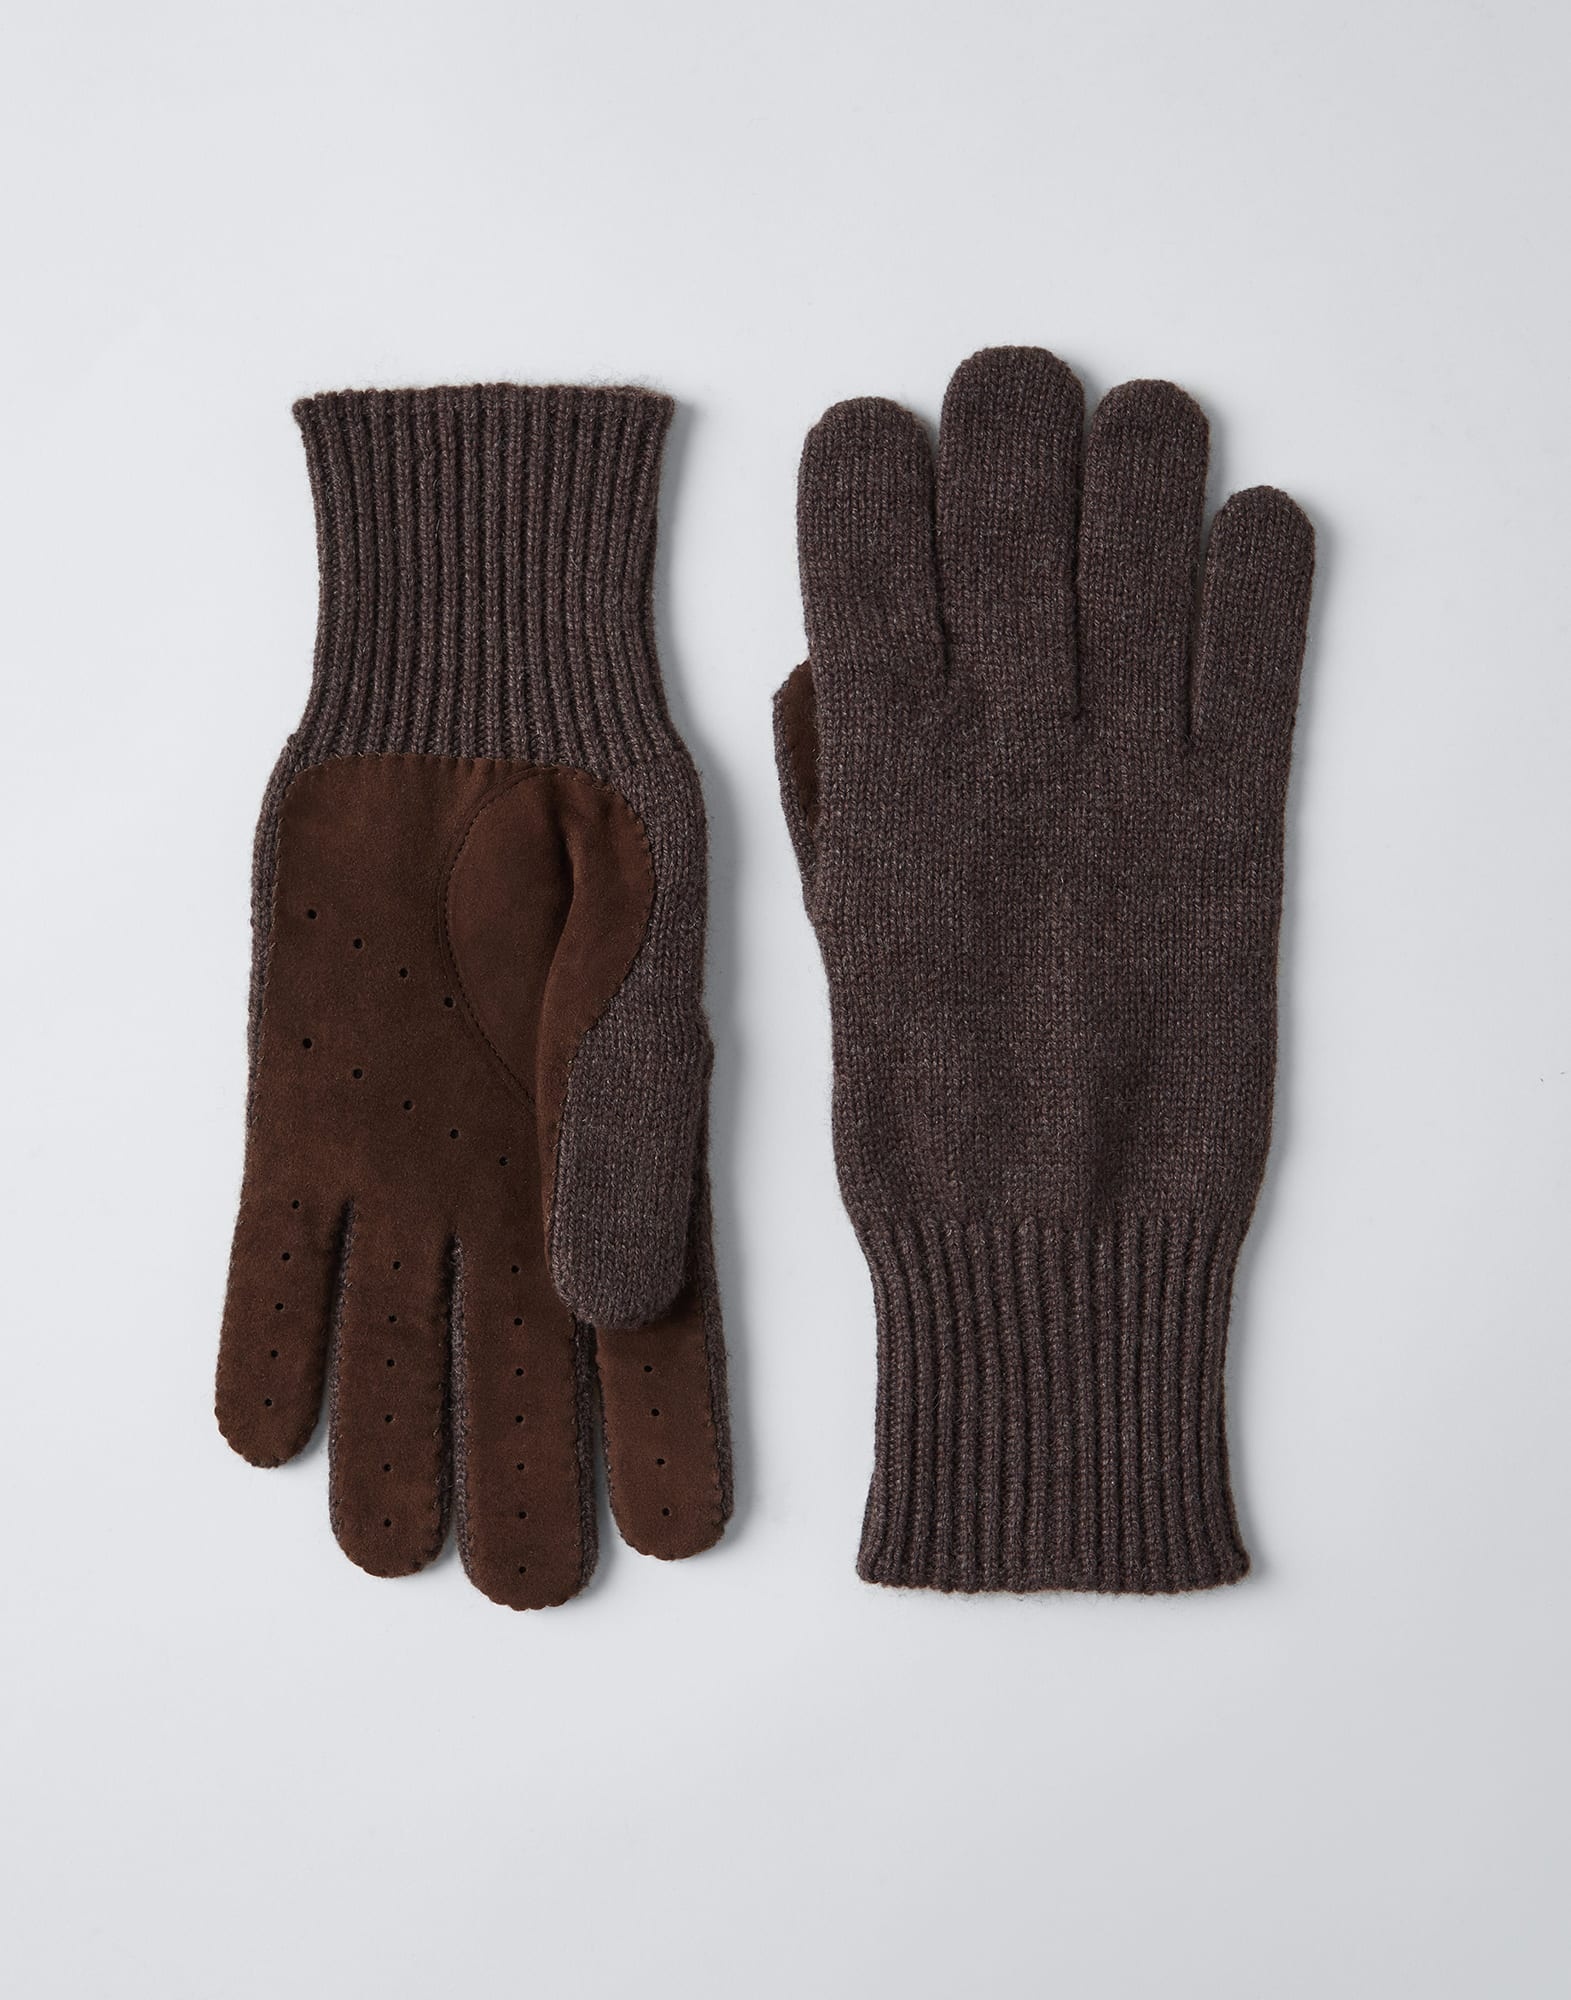 Cashmere knit gloves with suede palm - 1